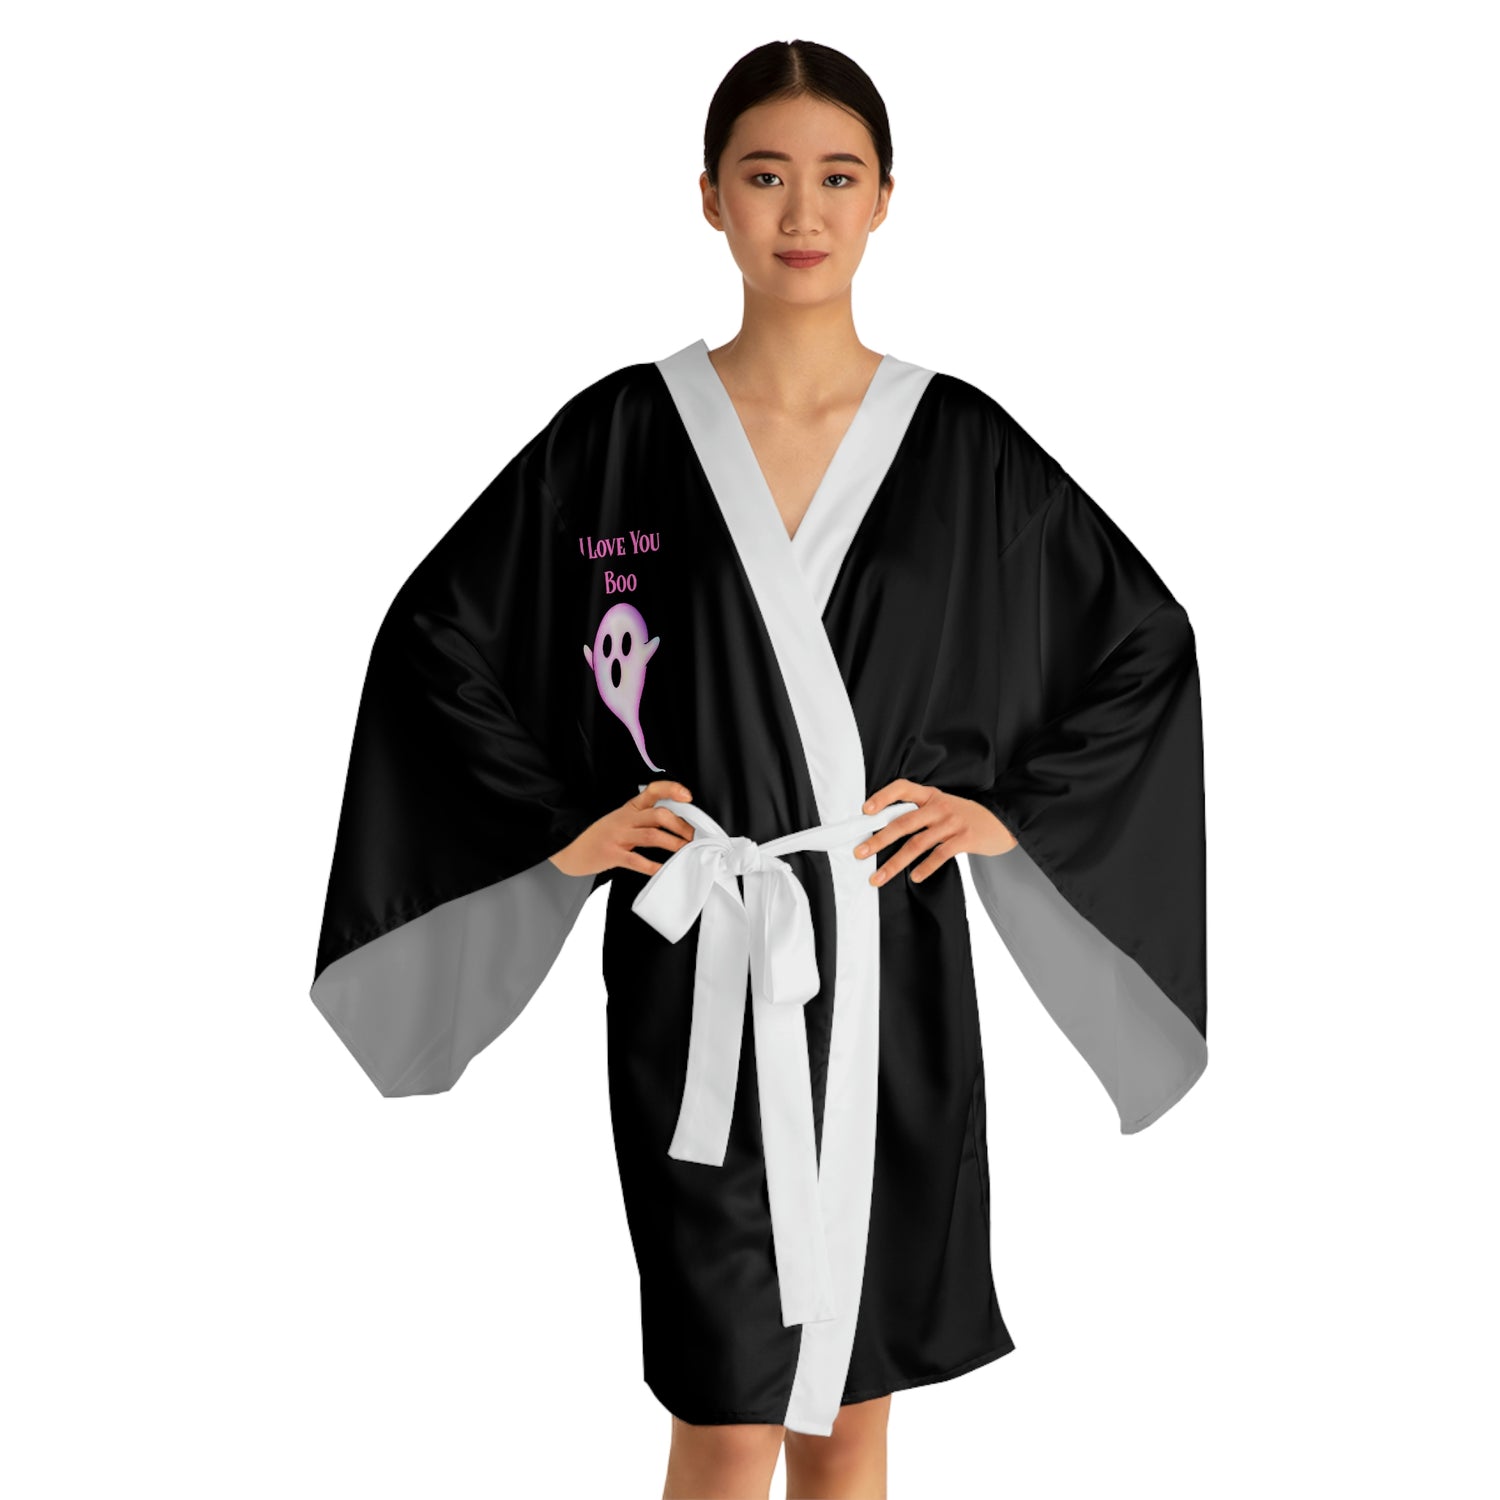 I Love You Boo White Trim Robe - Witchy Kitchens